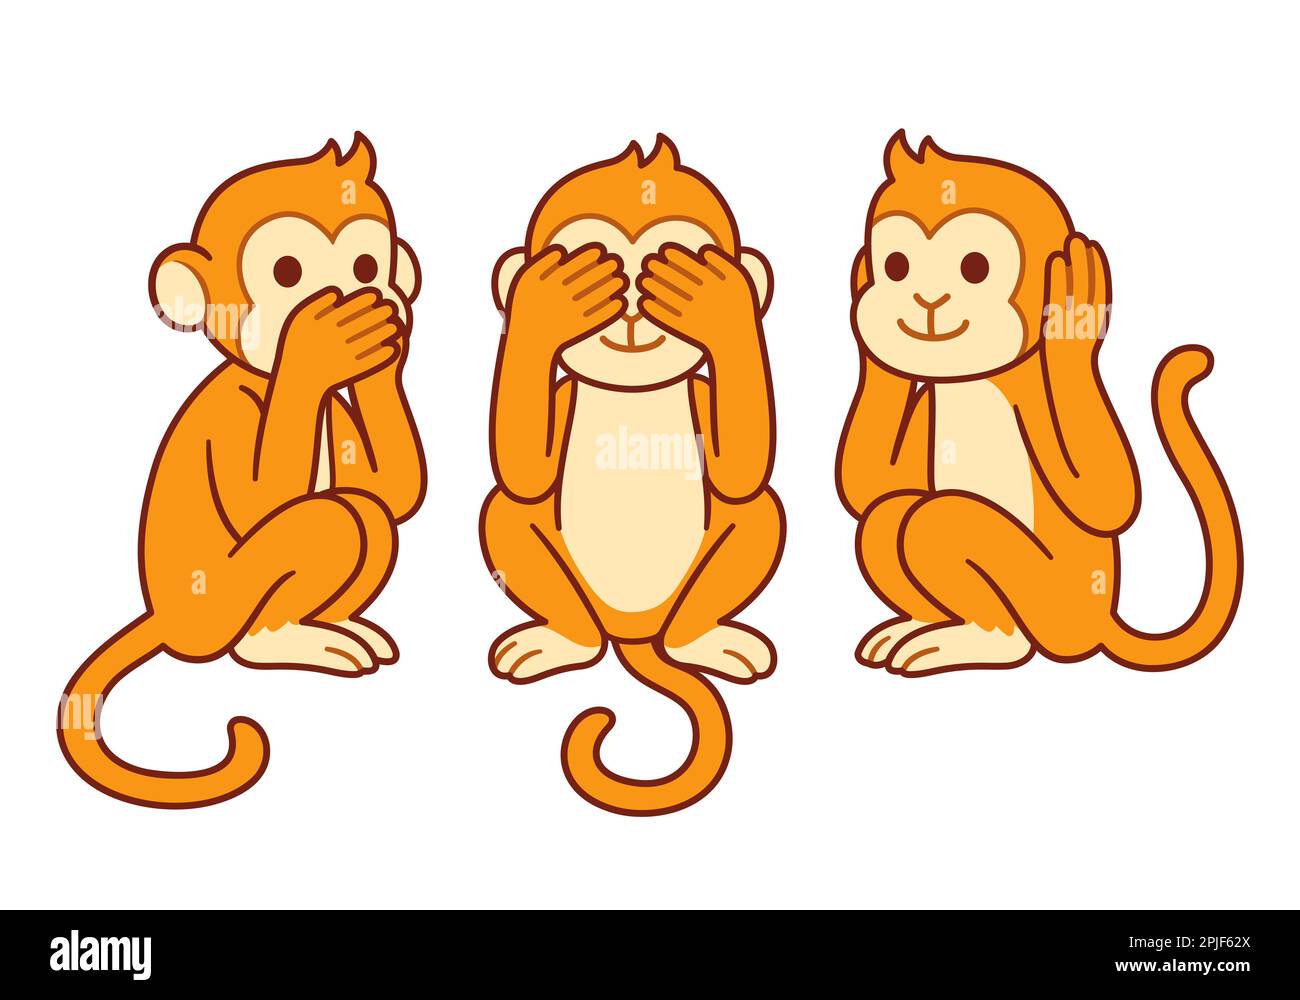 Three wise monkeys with hands covering eyes, ears and mouth: See no evil, Hear no evil, Speak no evil. Cute cartoon funny character illustration. Stock Vector